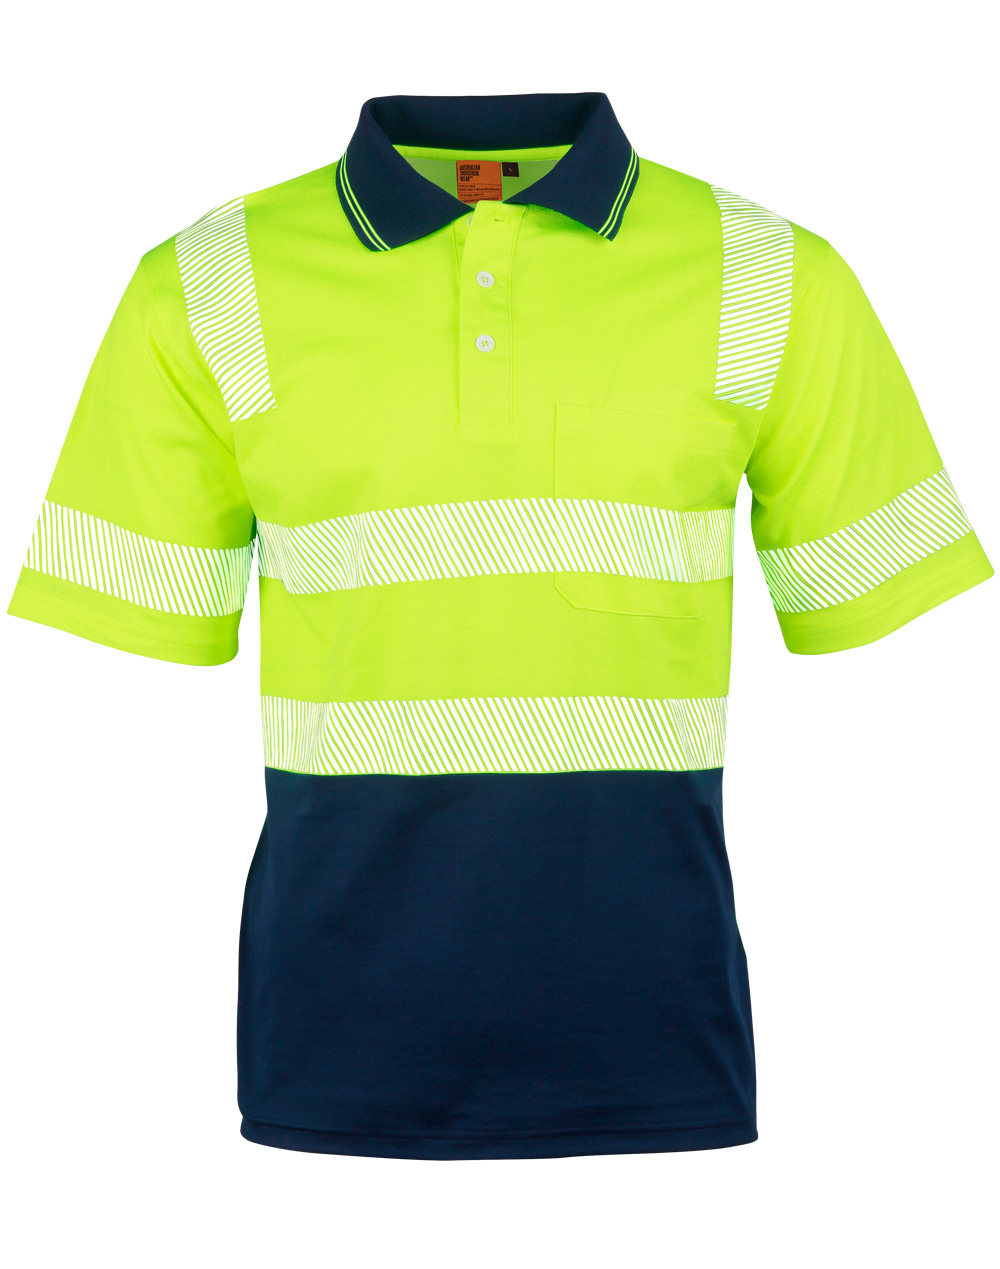 SW73 UNISEX TRUEDRY® BIOMOTION SEGMENTED SS SAFETY POLO